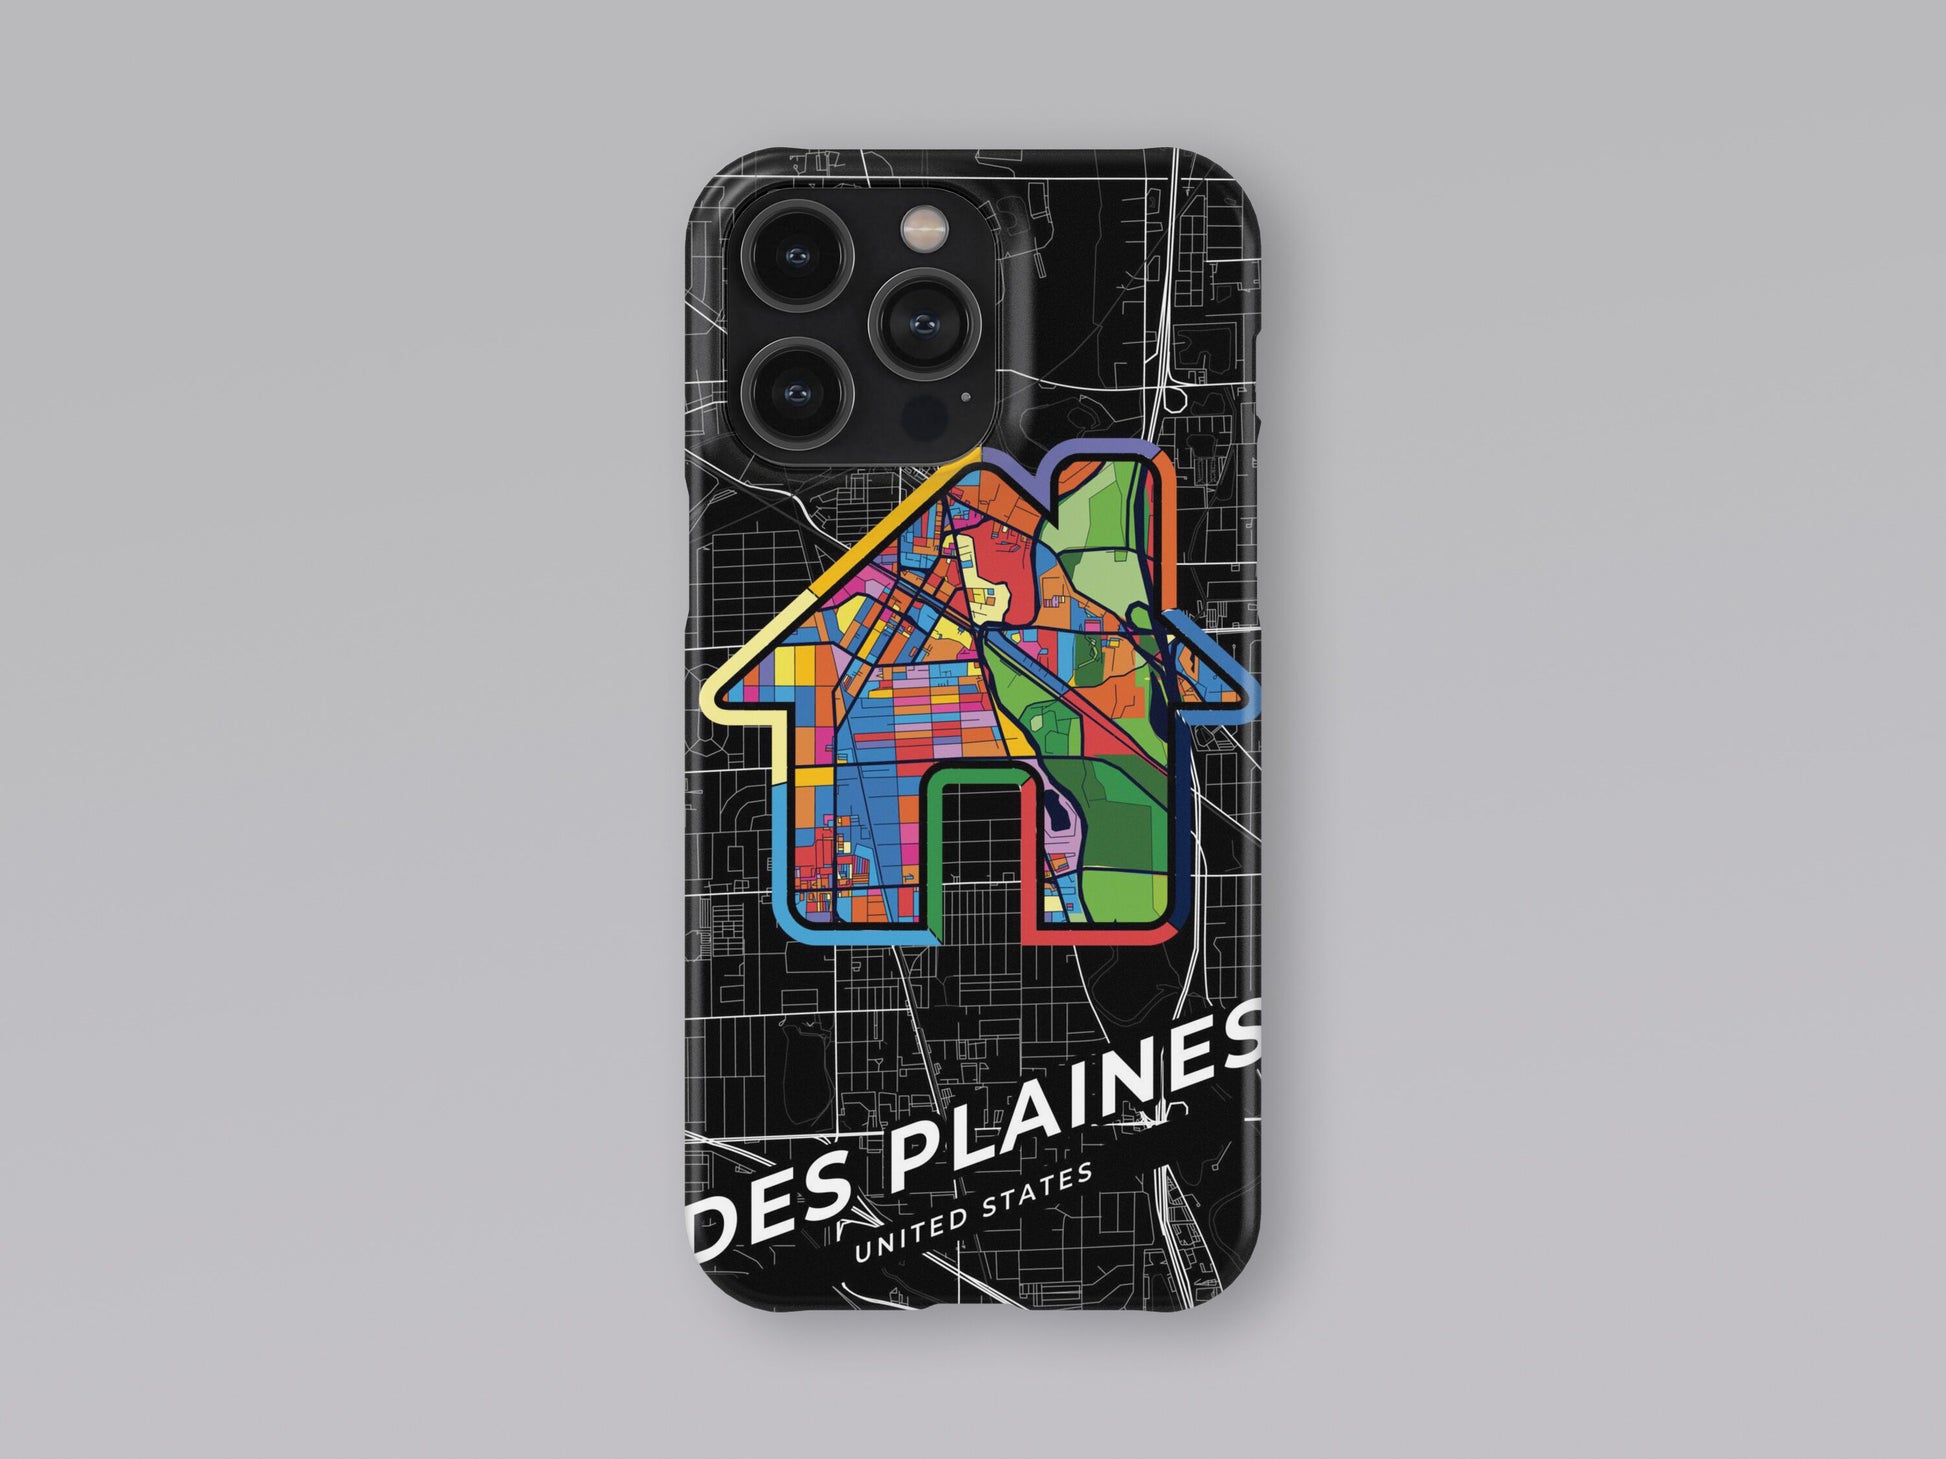 Des Plaines Illinois slim phone case with colorful icon. Birthday, wedding or housewarming gift. Couple match cases. 3